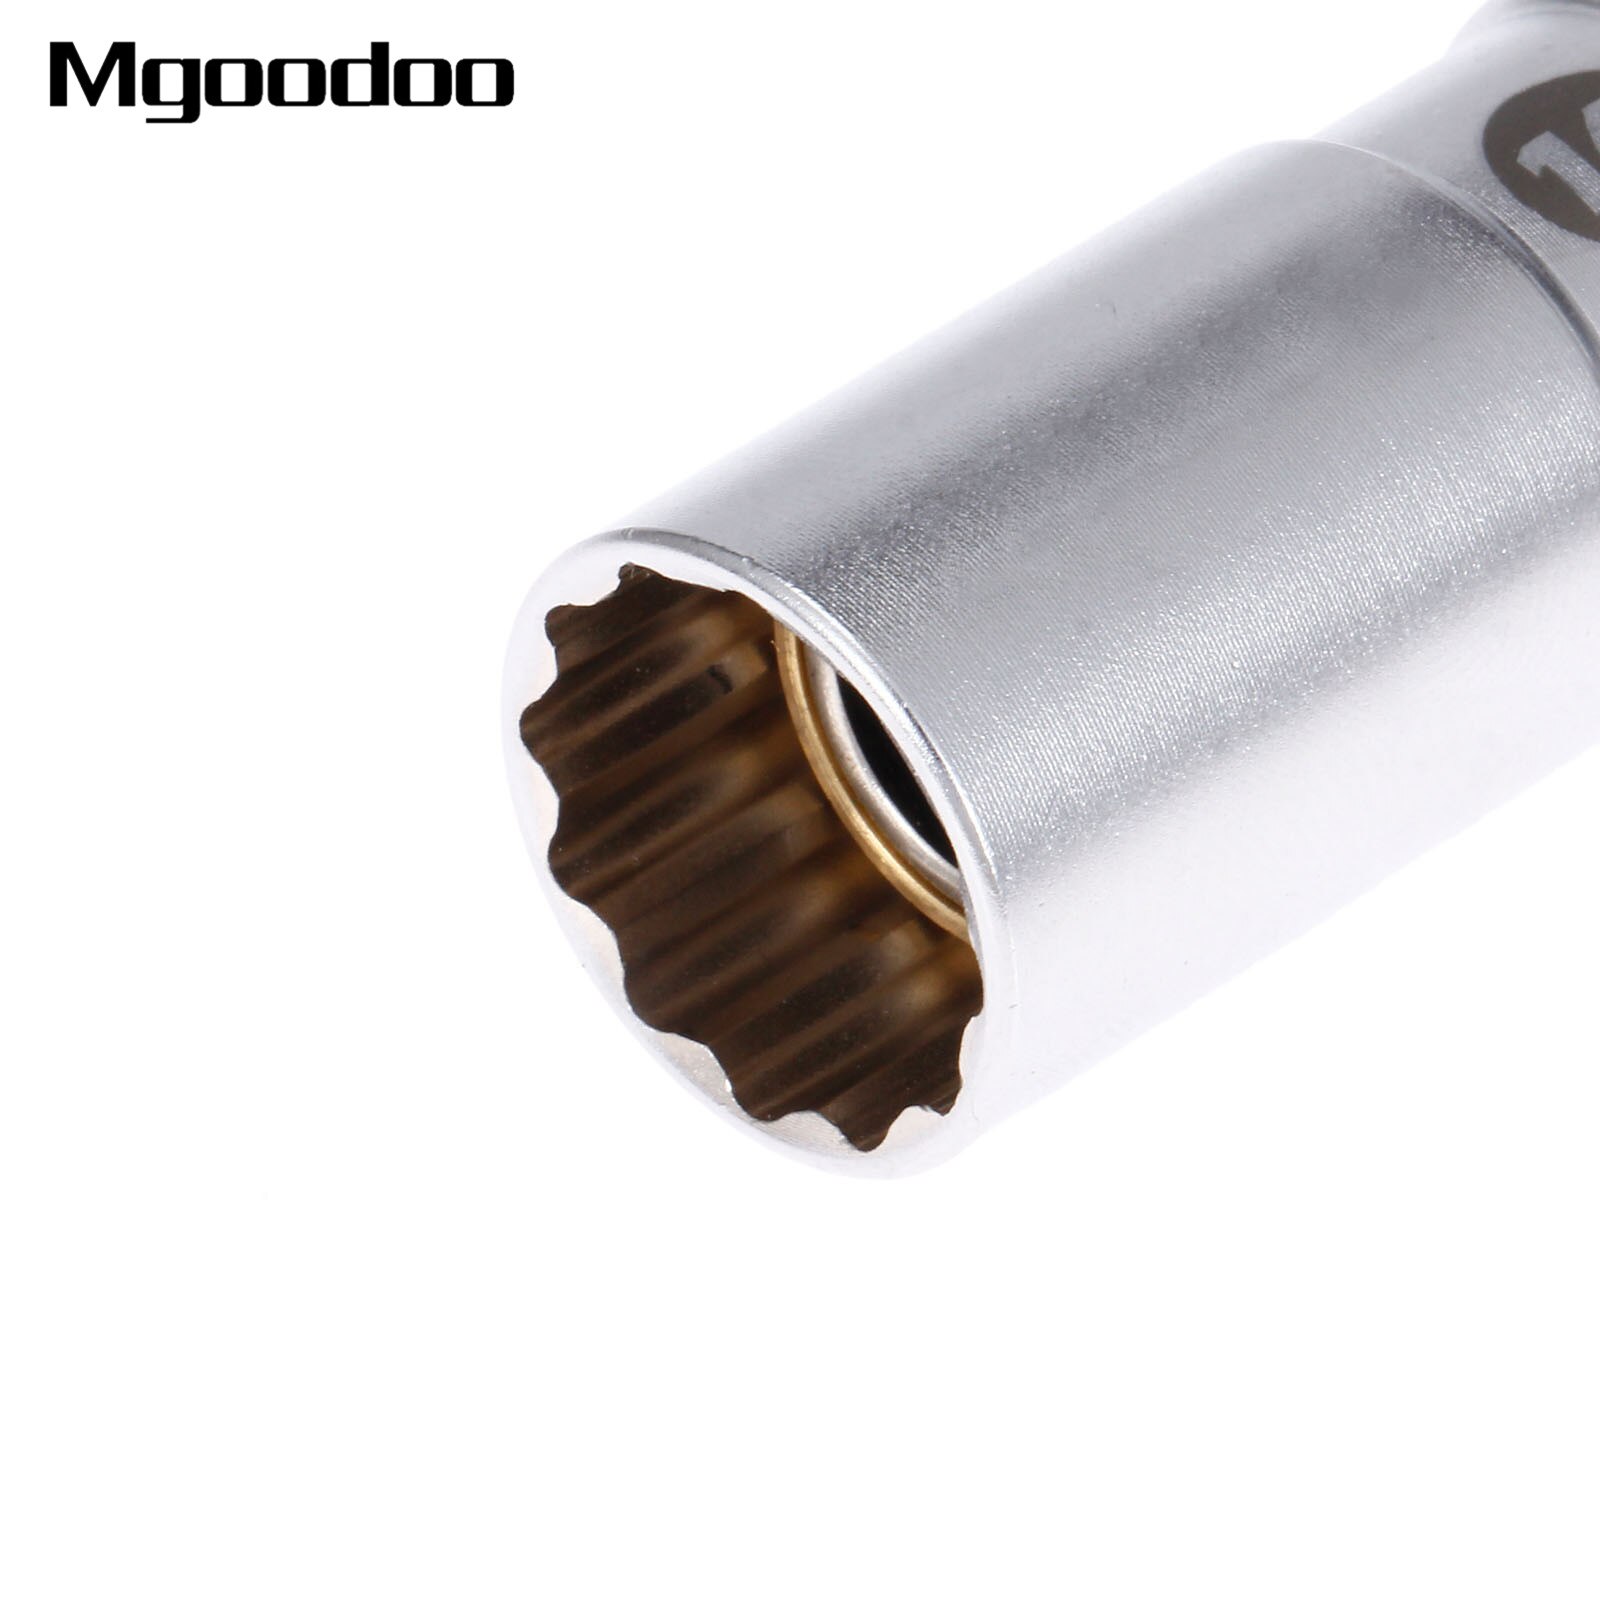 Mgoodoo Universal 16mm Thin Wall Magnetic Swivel Spark Plug Socket 5/8 Inch Drive 12pt 97L Auto Car Removal Tool Accessories